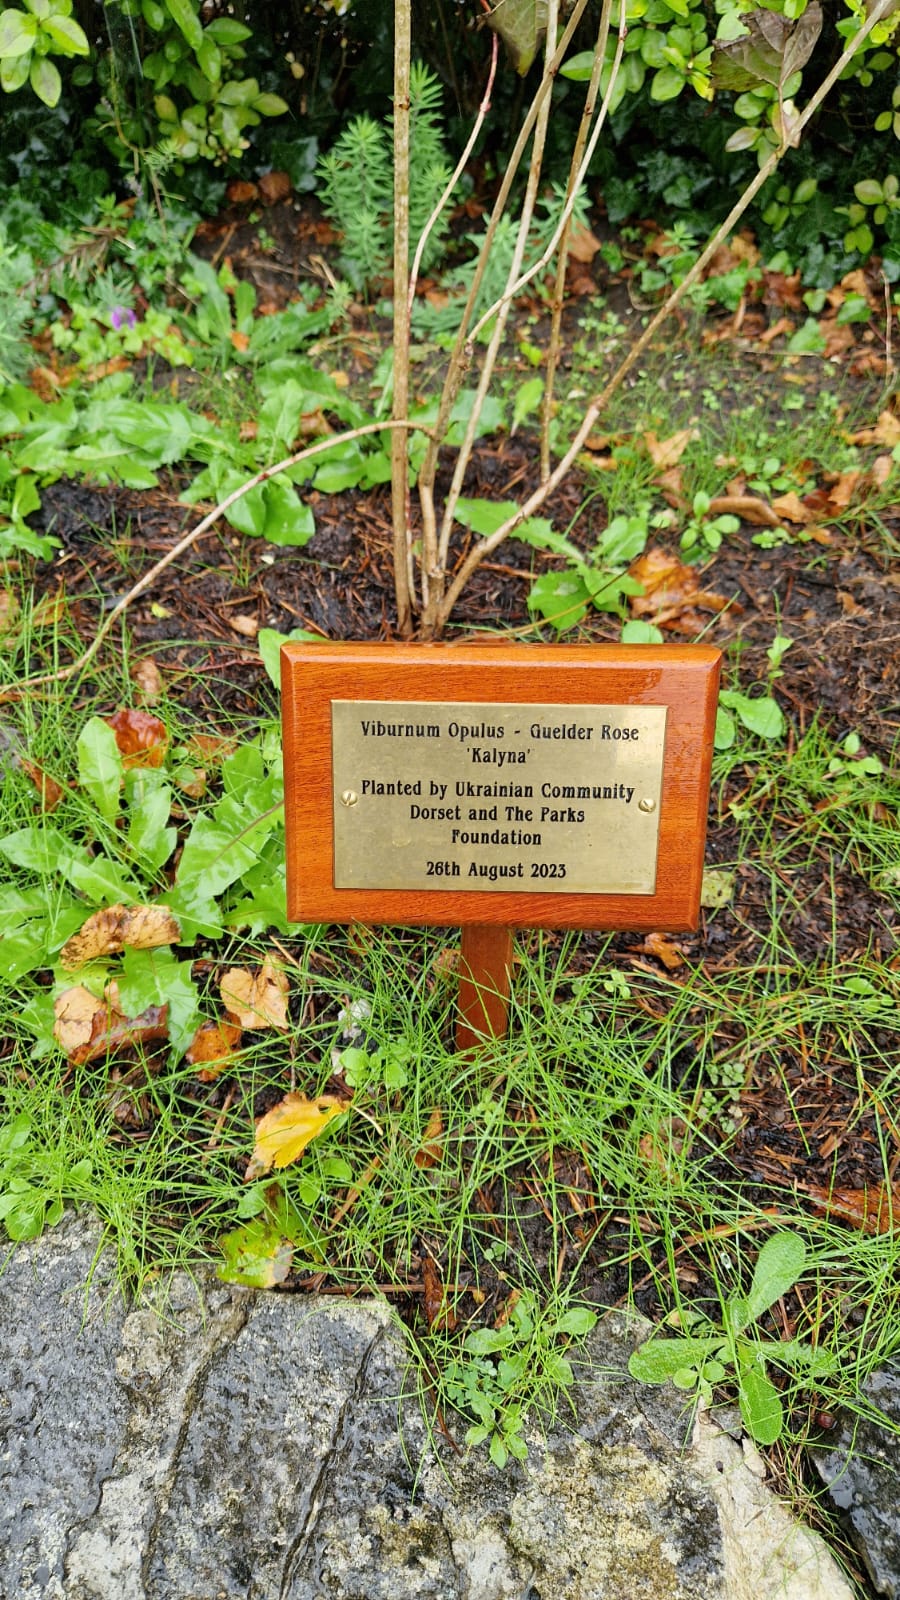 A Viburnum Opulus tree planted in Redhill Park with a wooden plaque